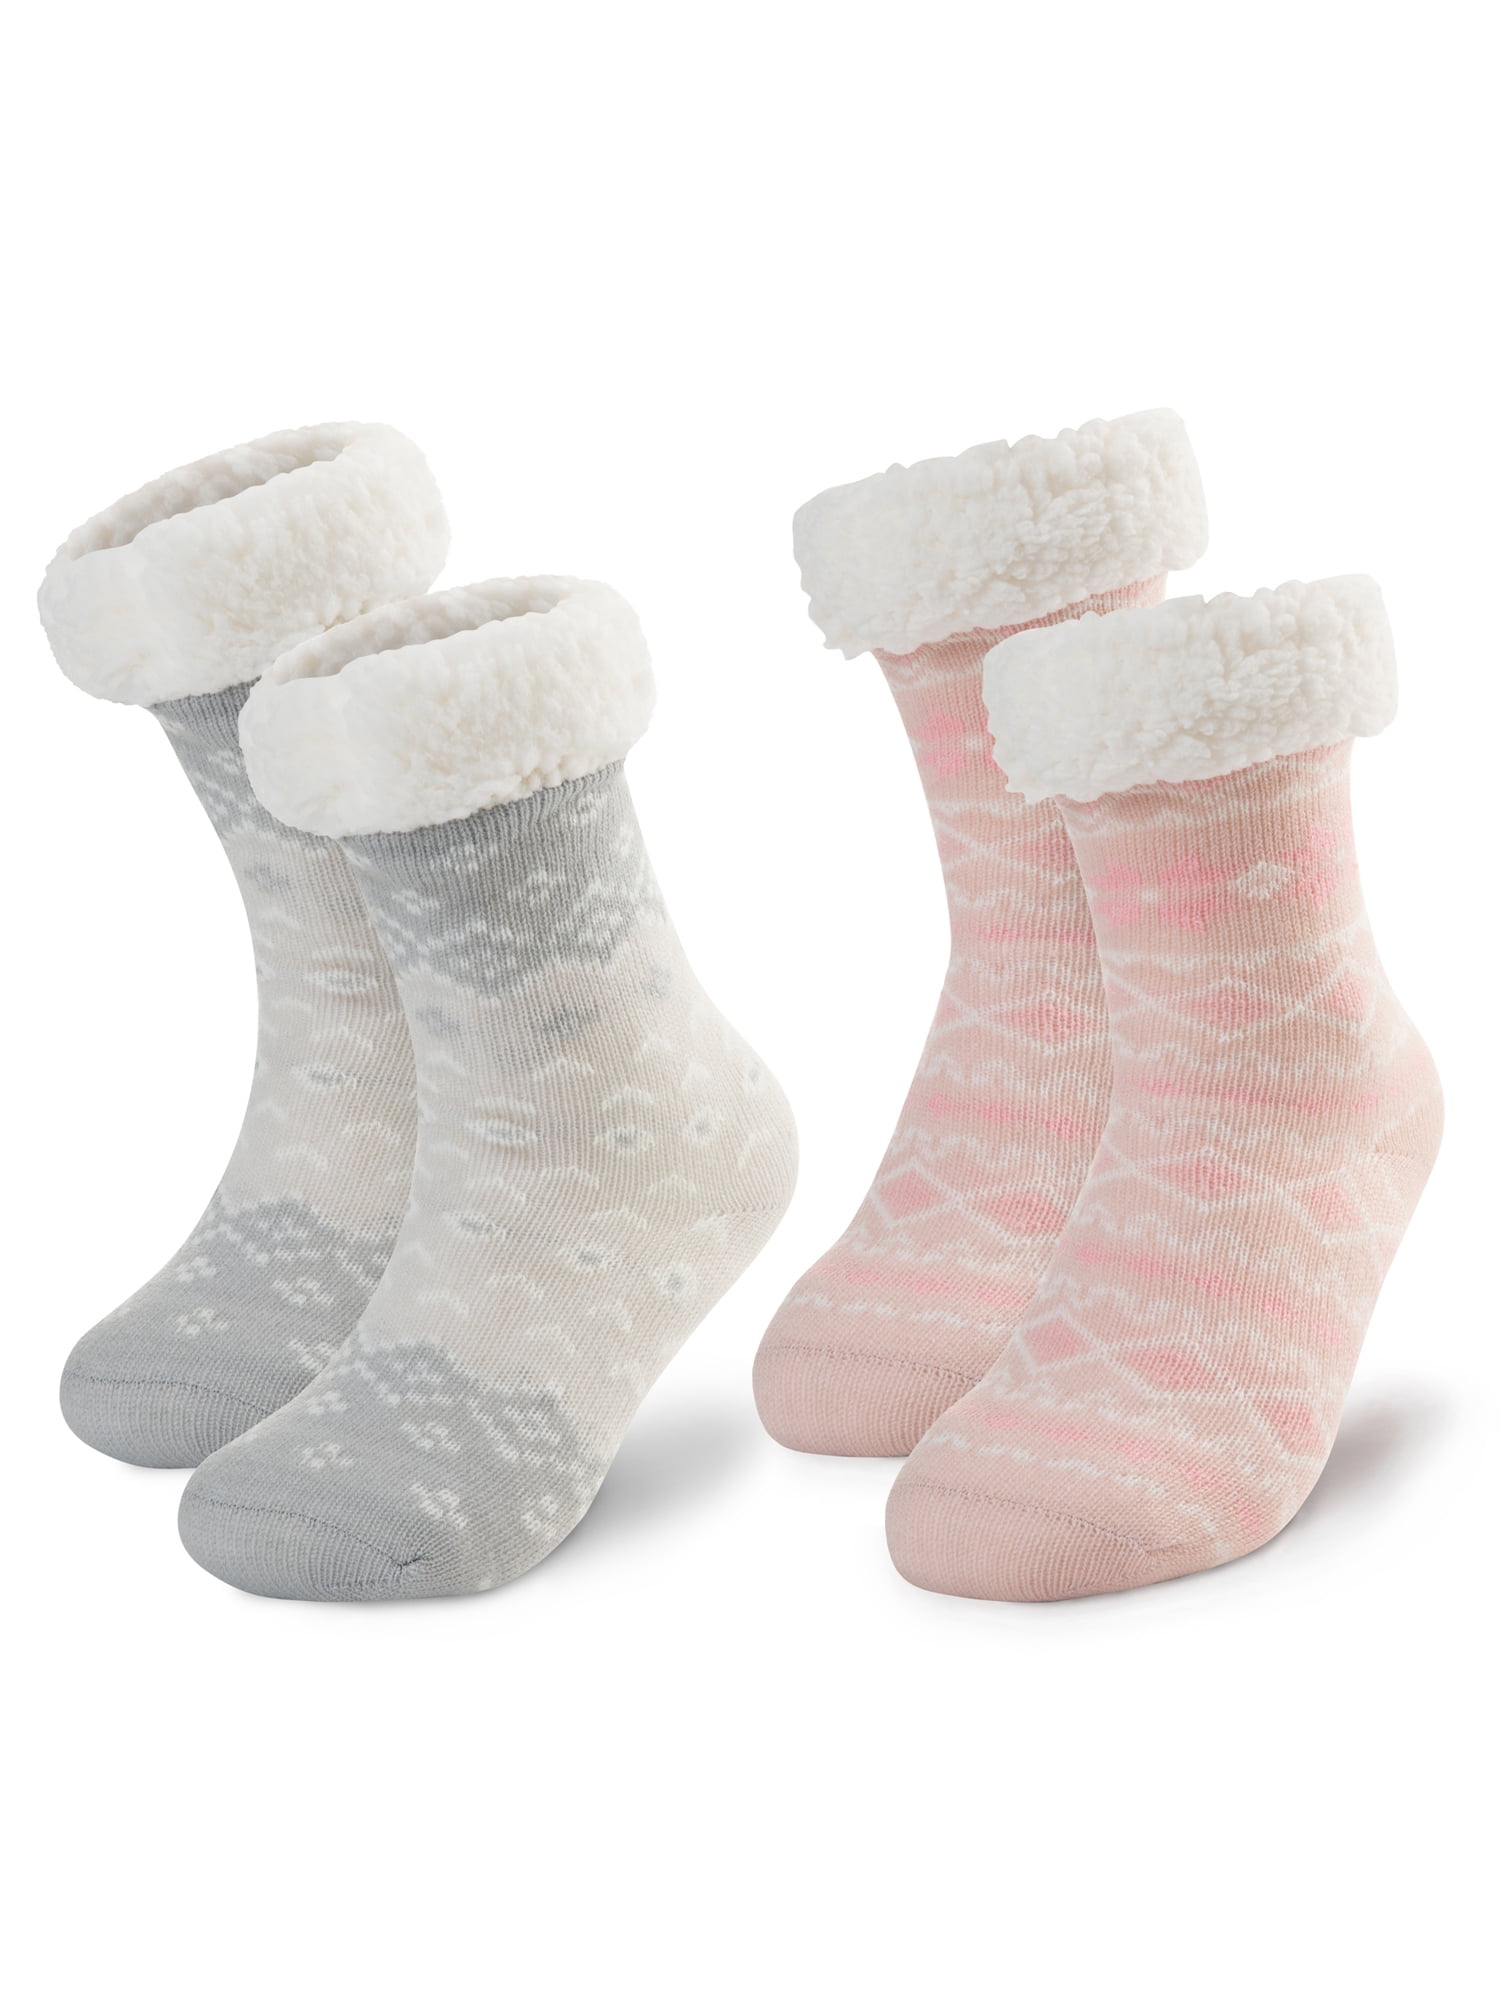 Treehouse Knits (2 Pack) Sherpa Slipper Socks for Kids with